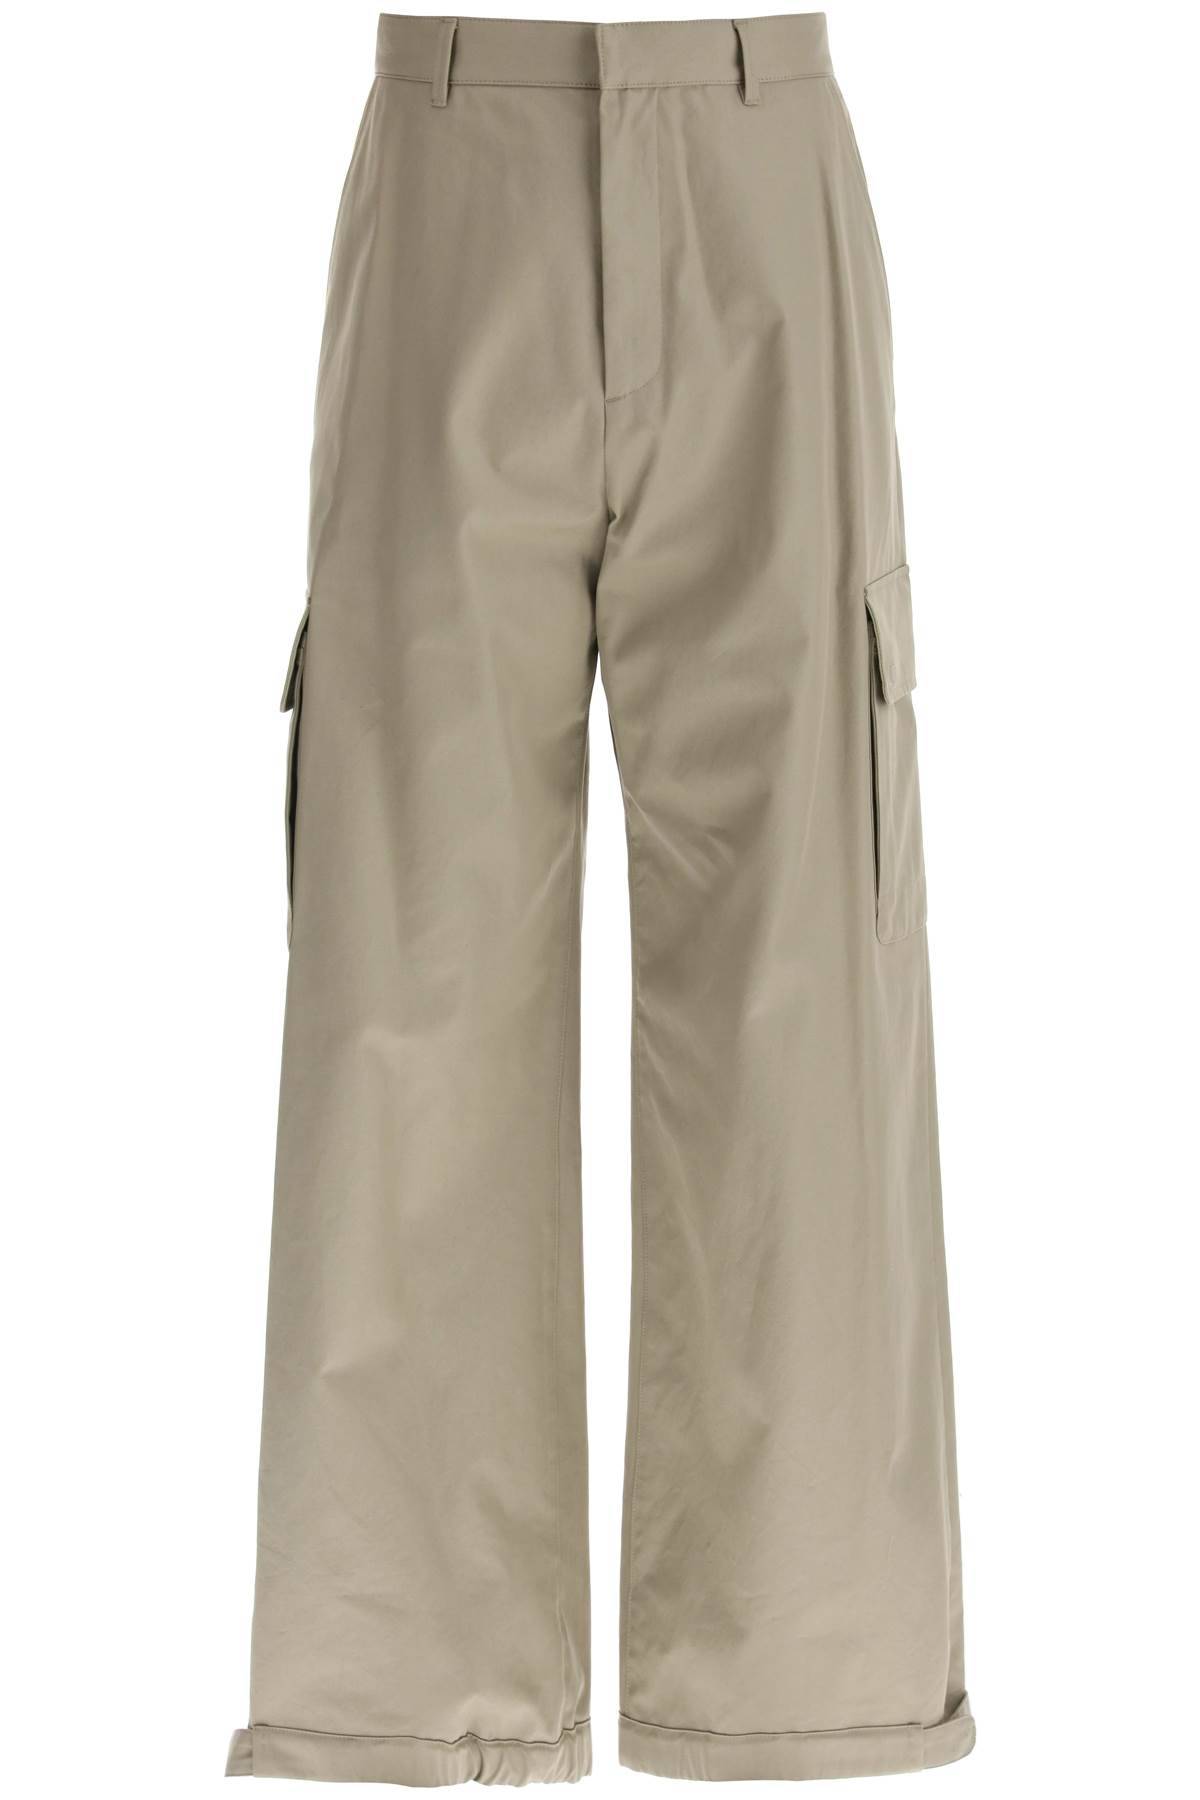 OFF-WHITE OFF-WHITE wide-legged cargo pants with ample leg